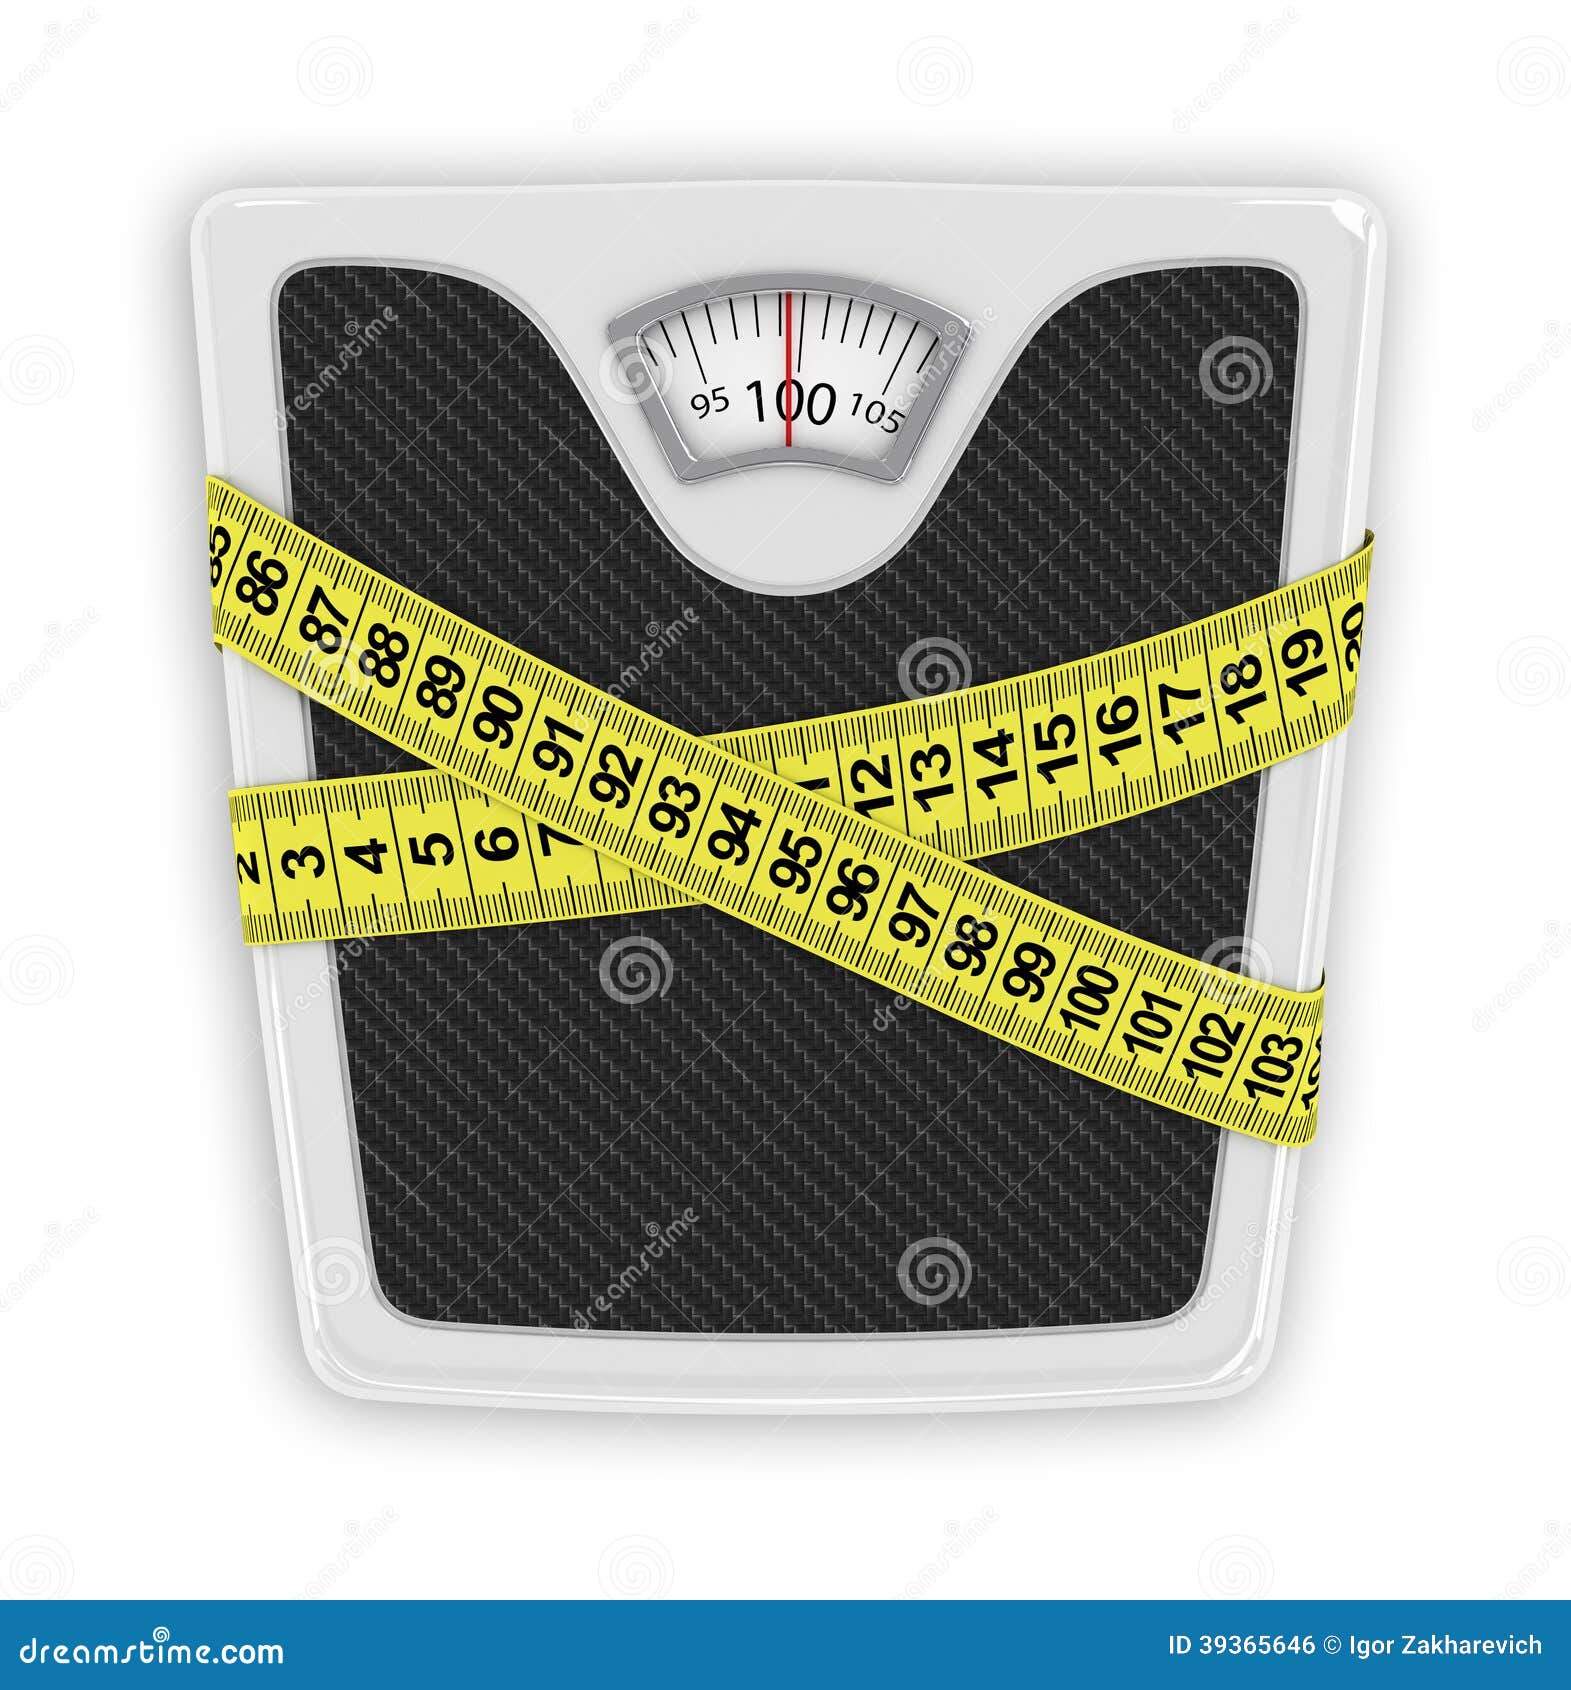 https://thumbs.dreamstime.com/z/measuring-tape-wrapped-around-bathroom-scales-concept-weight-loss-diet-healthy-lifestyle-39365646.jpg